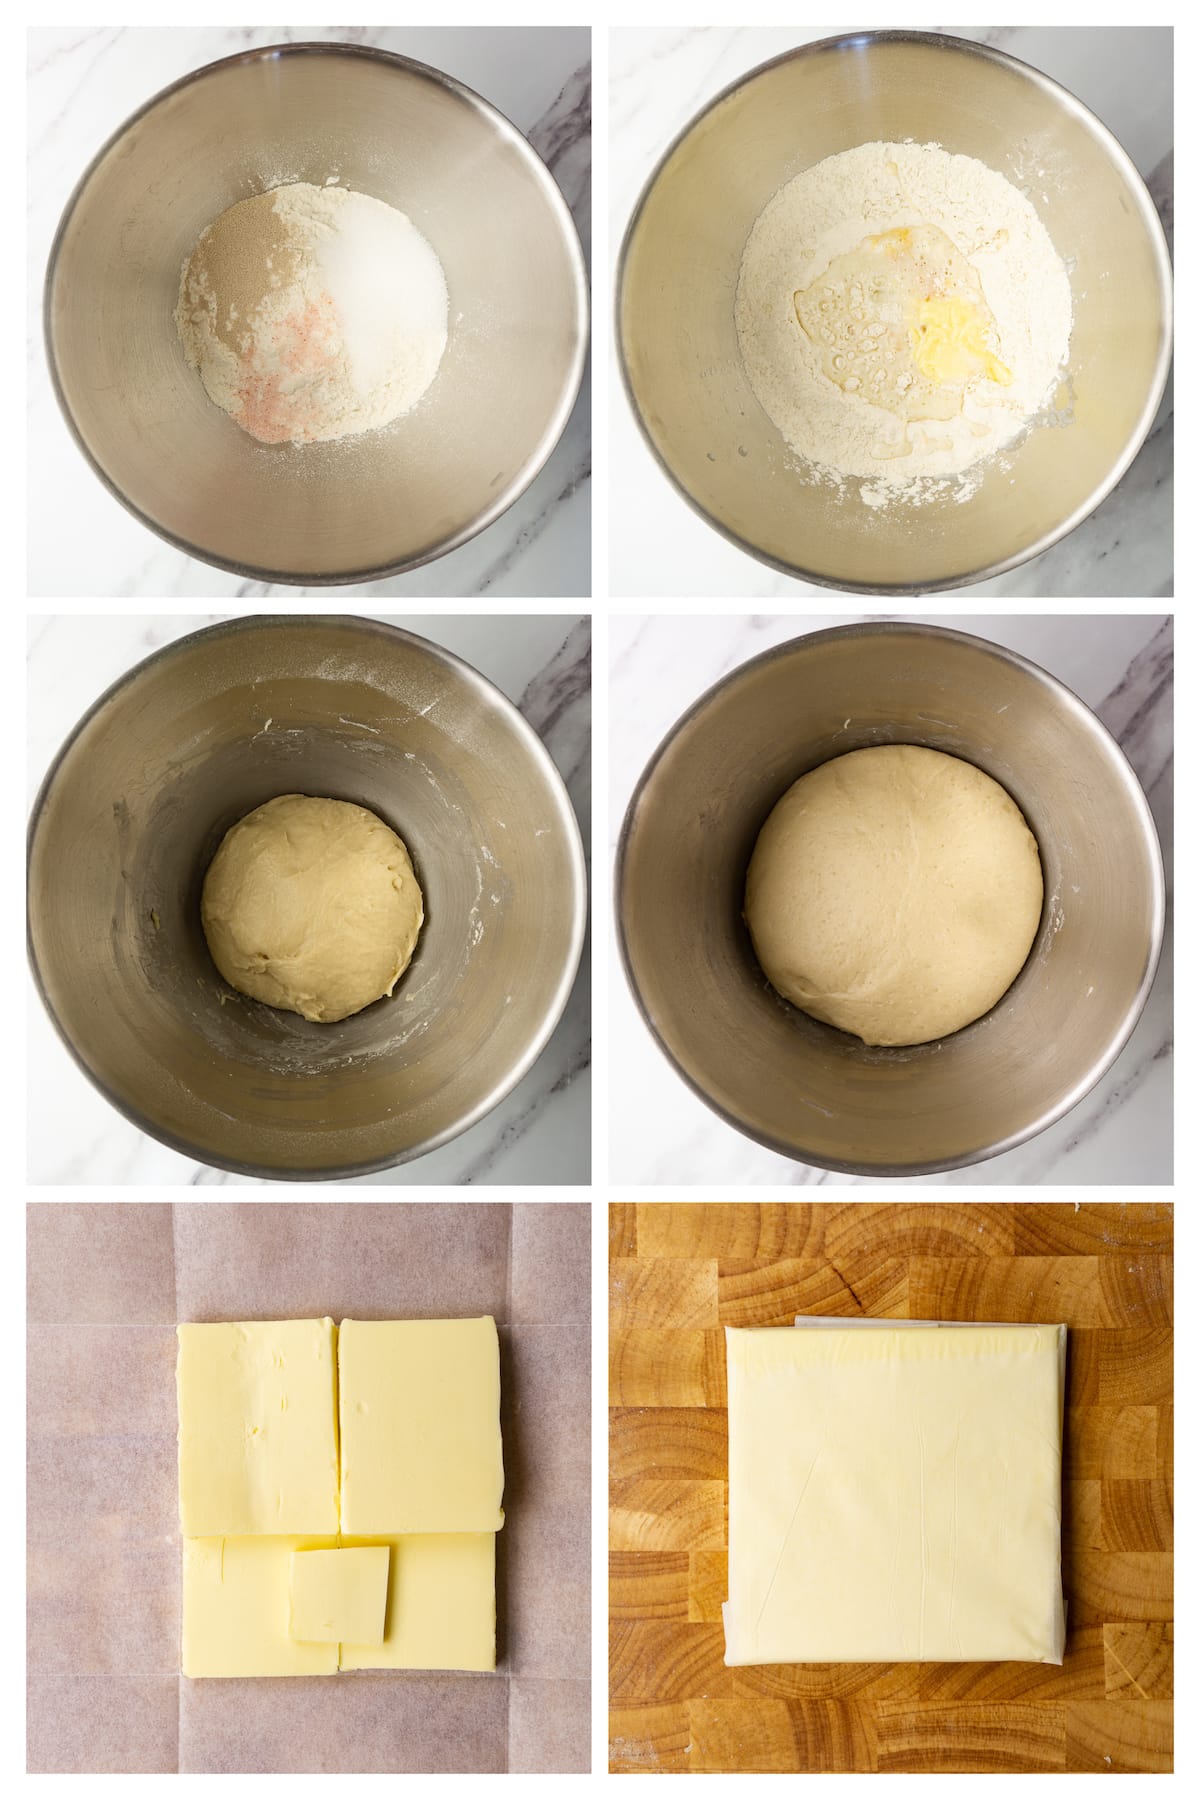 The collage image shows six steps to make the dough and the butter block for Danish pastry.